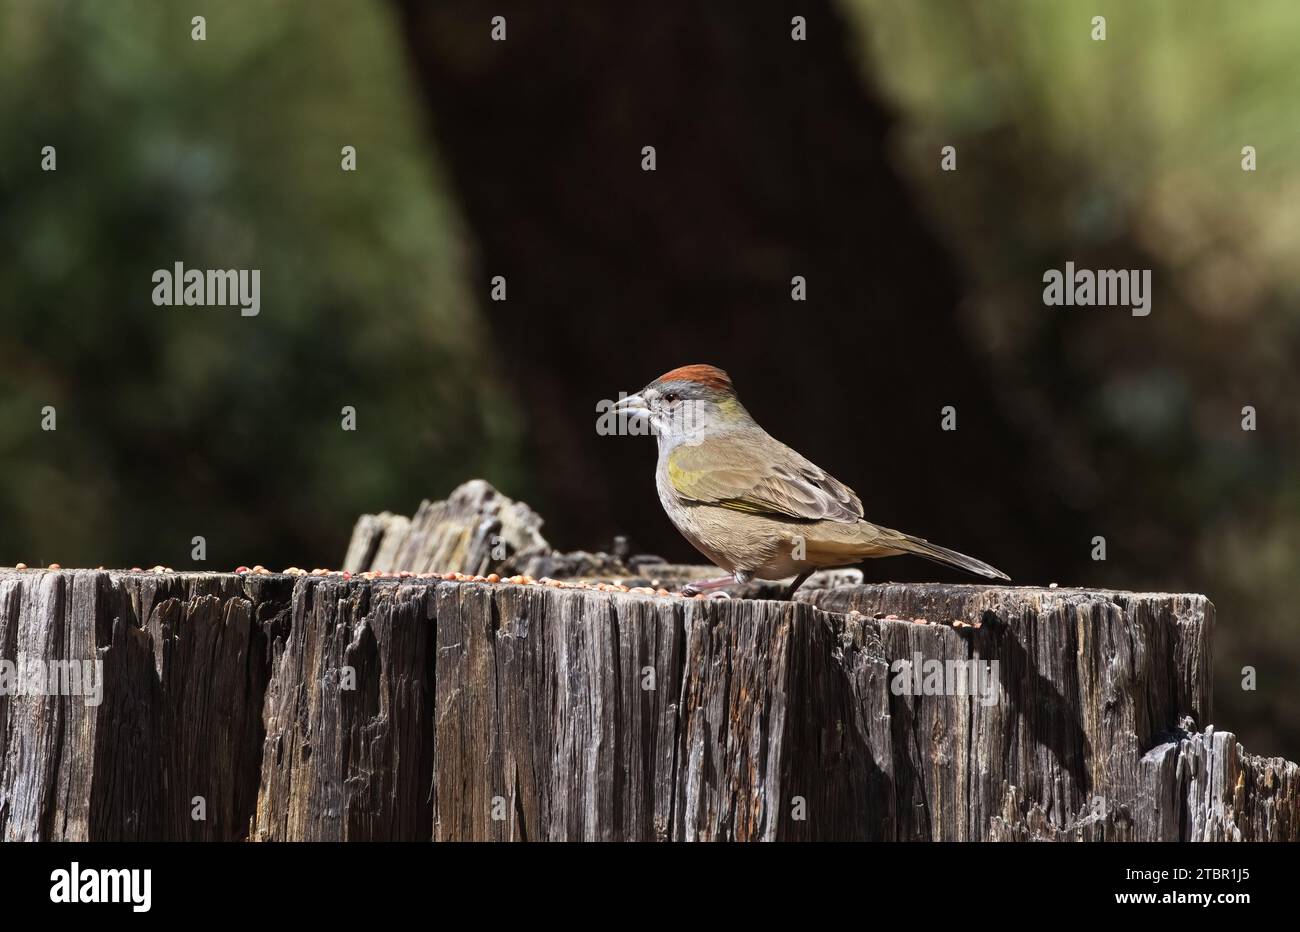 Chainsaw cut tree stump serves as natural seed feeder tray to attract and feed wild birds like Green tailed Towhee Stock Photo